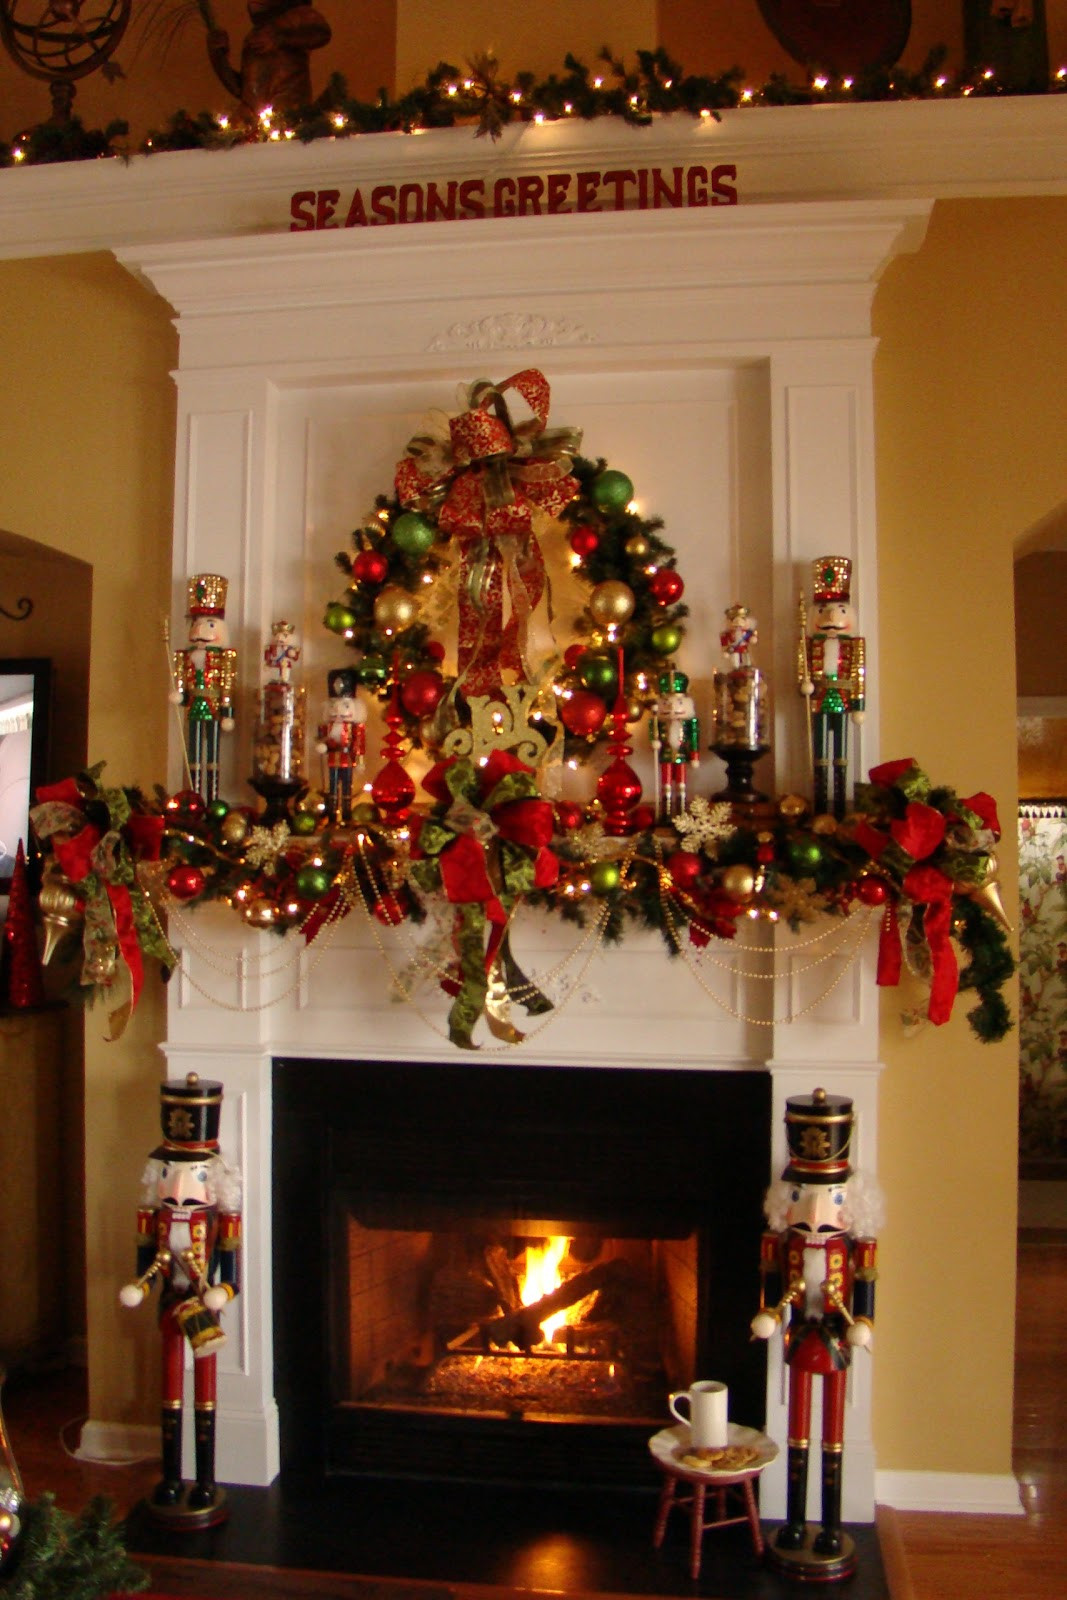 Decorate Fireplace For Christmas
 Adventures in Decorating Nutcracker Mantel